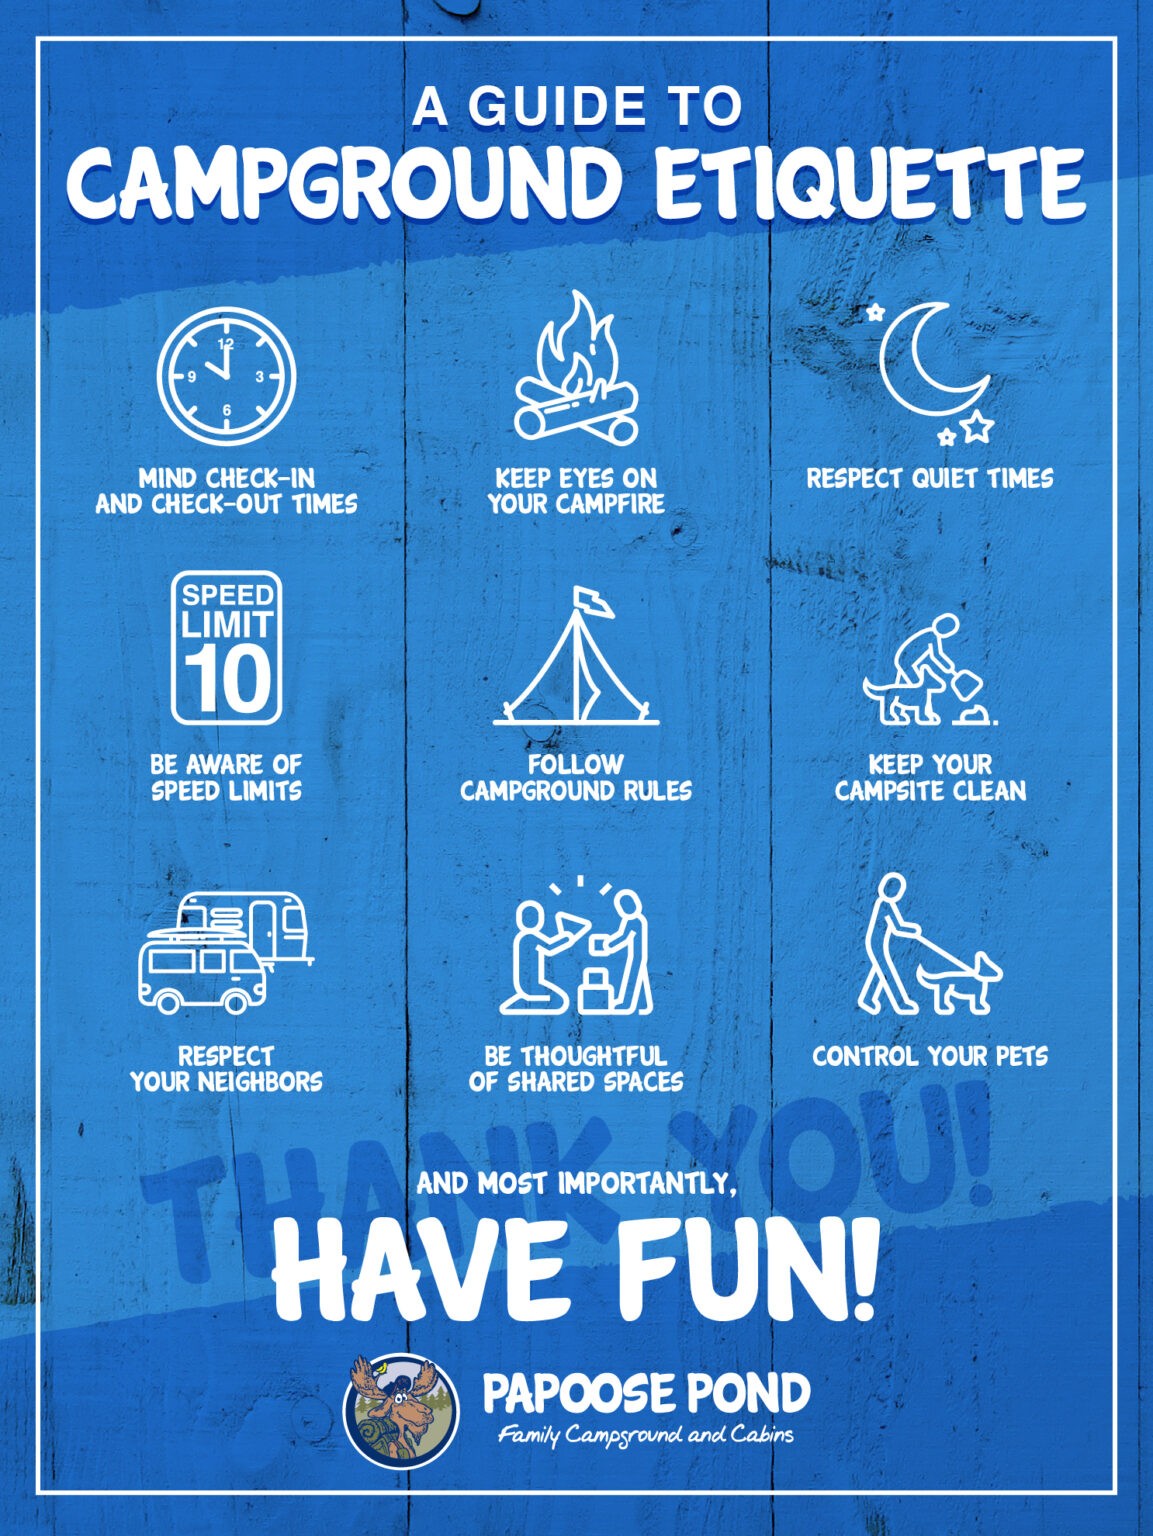 Responsible Camping: Embrace Leave No Trace, PTT Outdoor, Camping Etiquette 2,